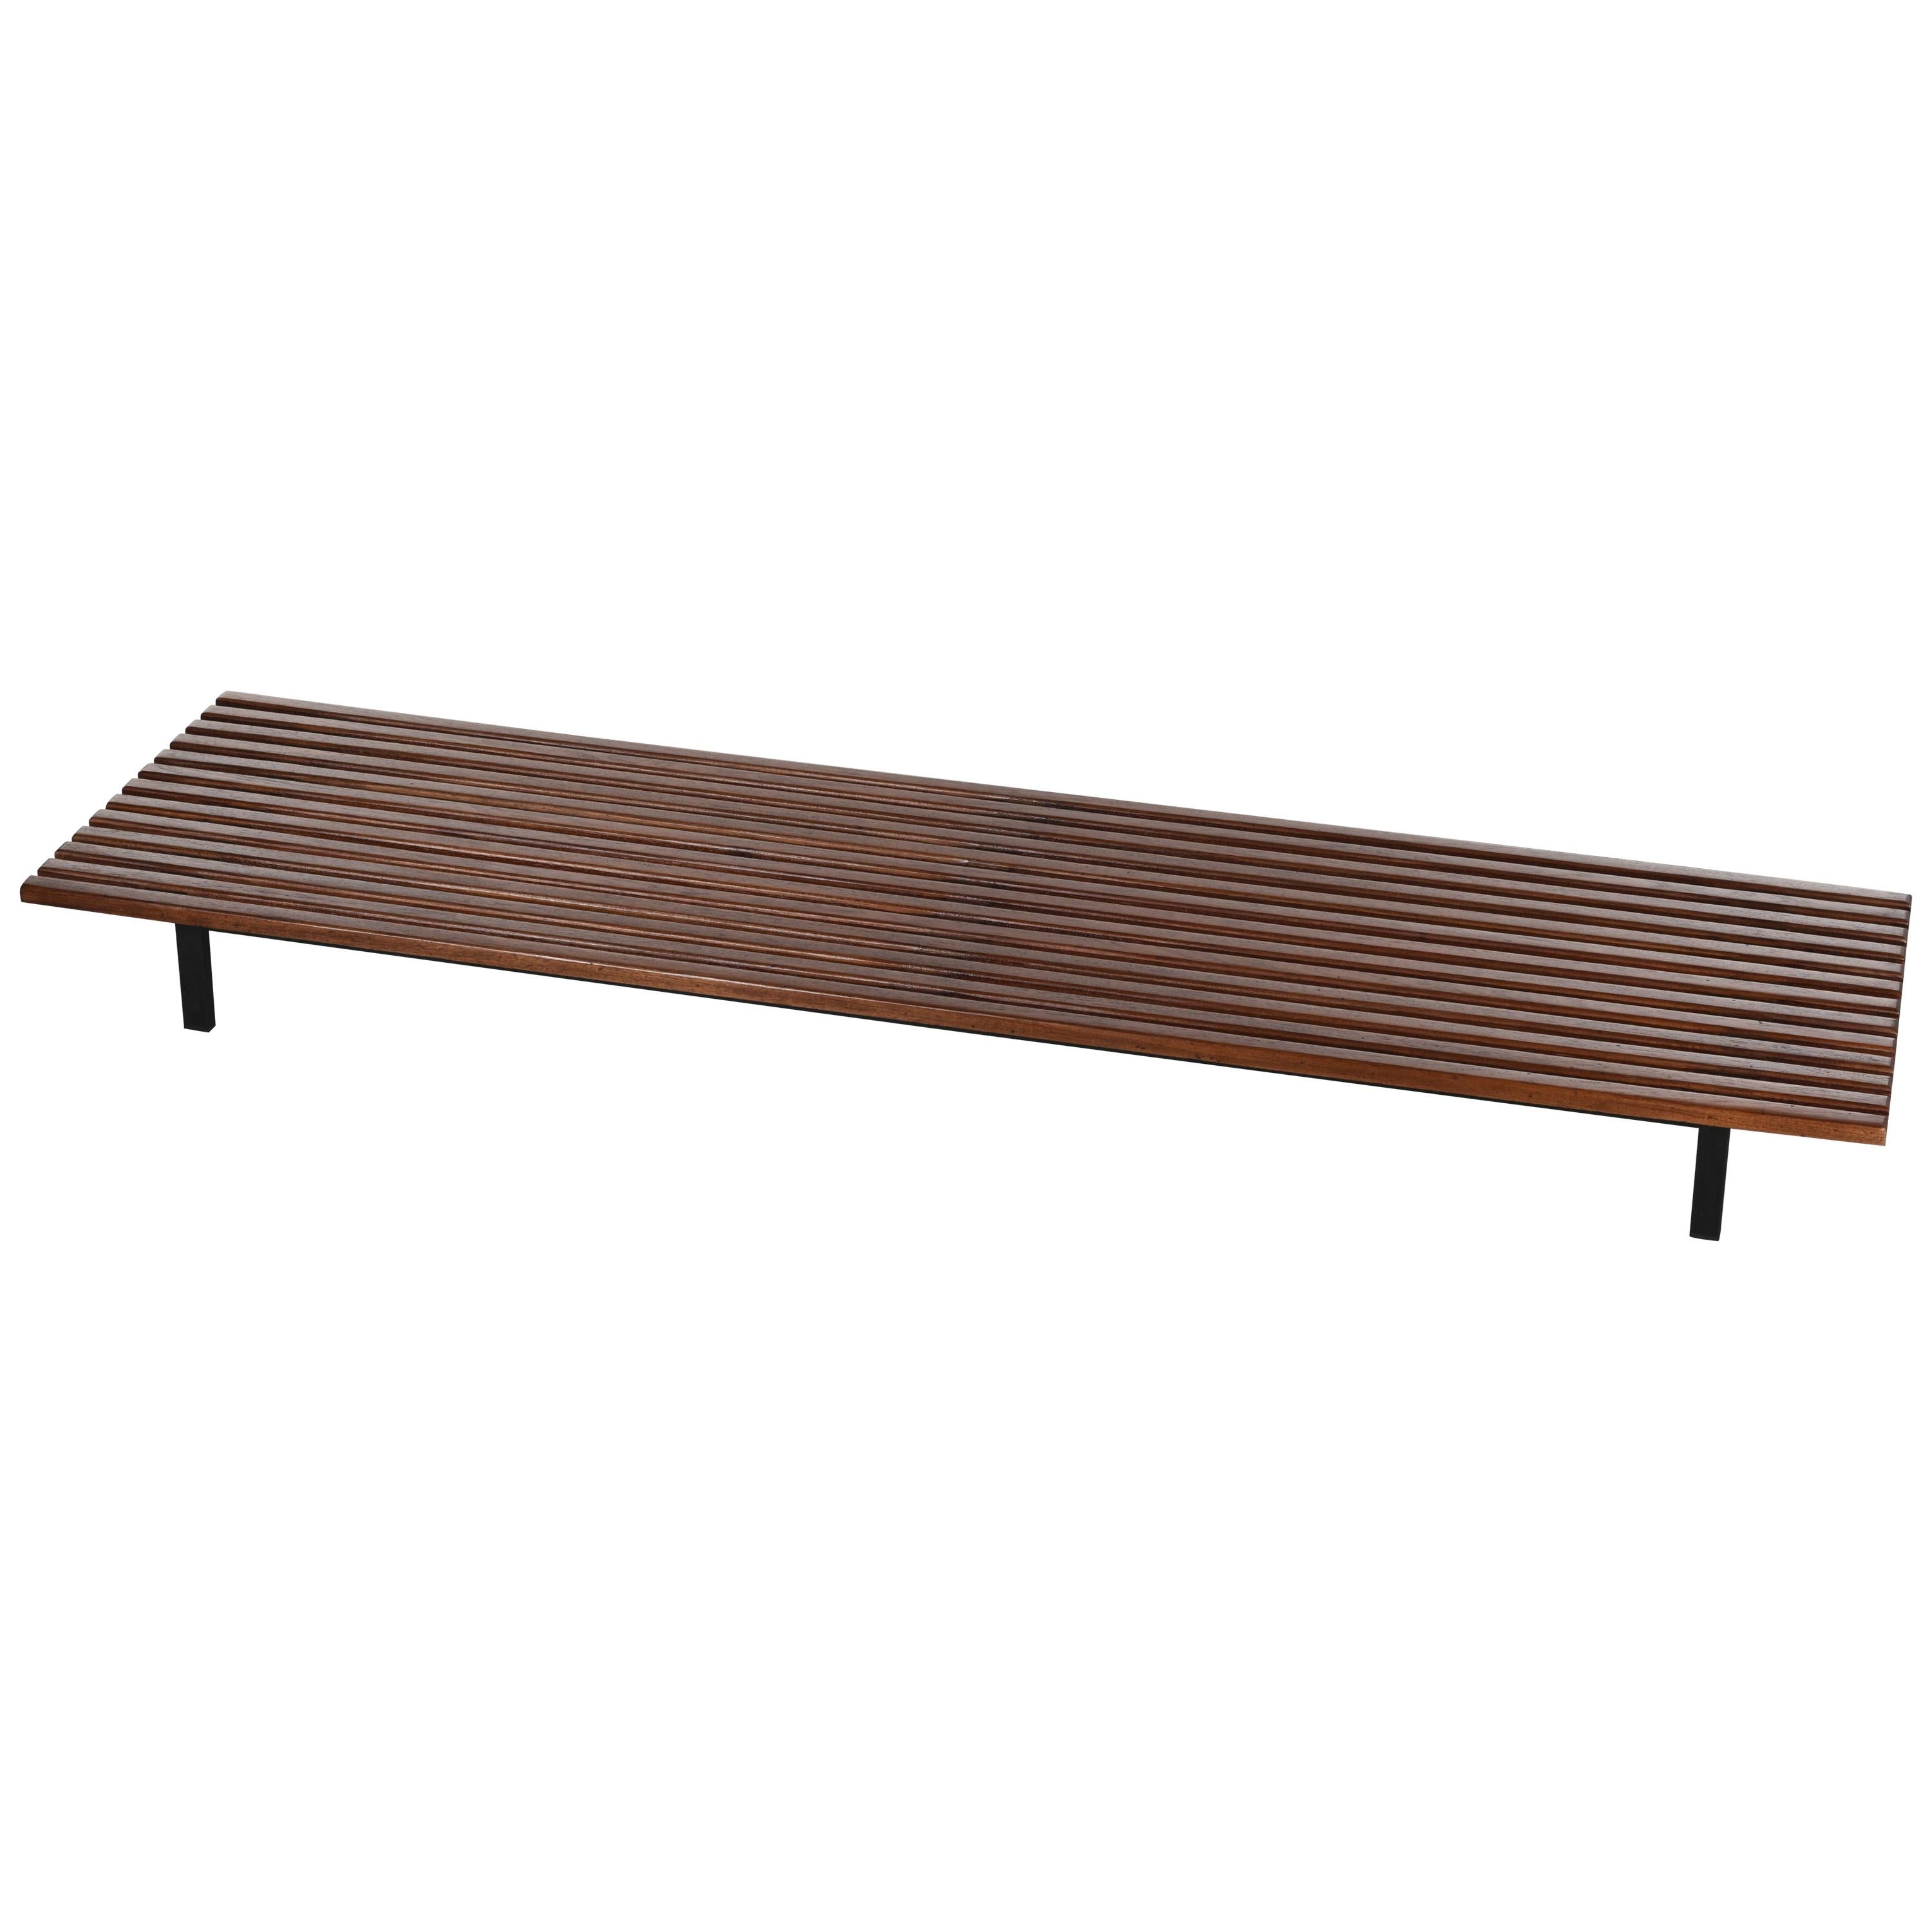 Charlotte Perriand Long Bench, Cansado Mining Town, Mauritania  For Sale